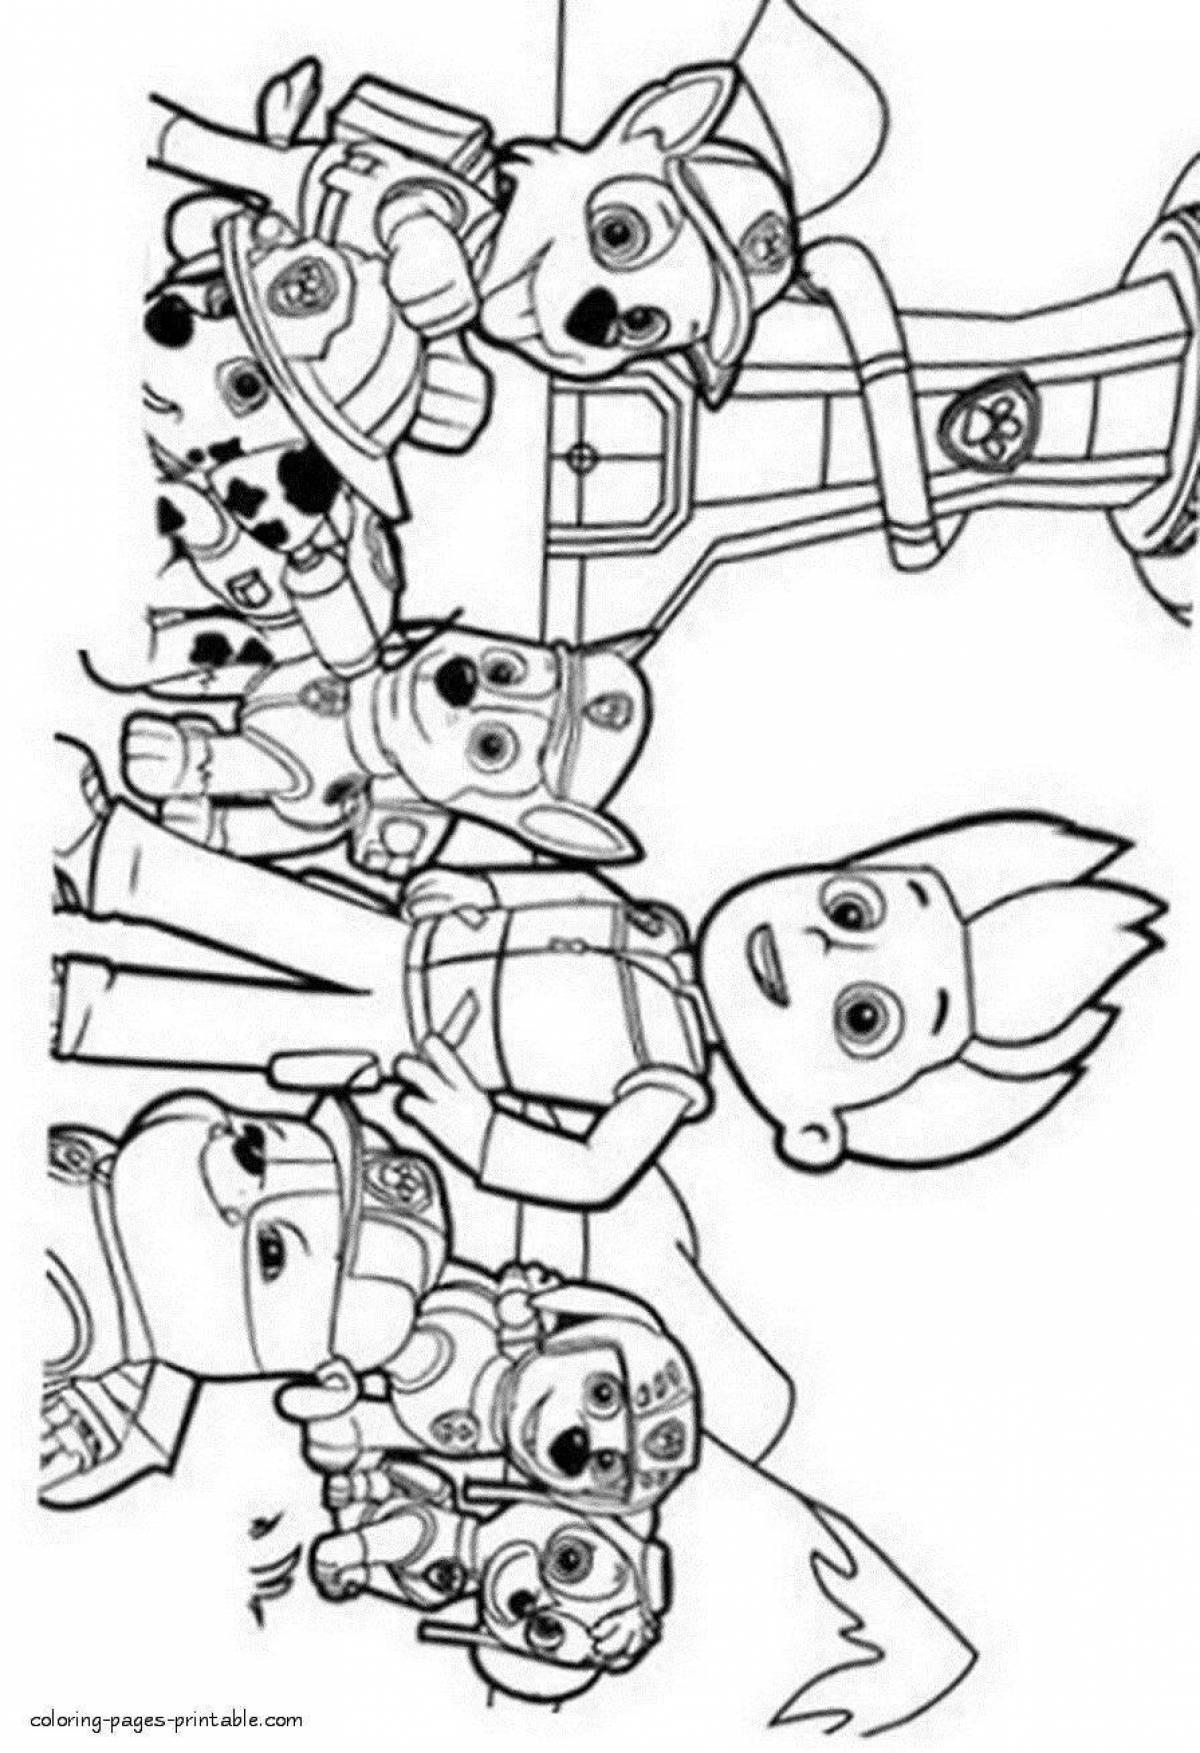 Amazing paw patrol tower coloring page